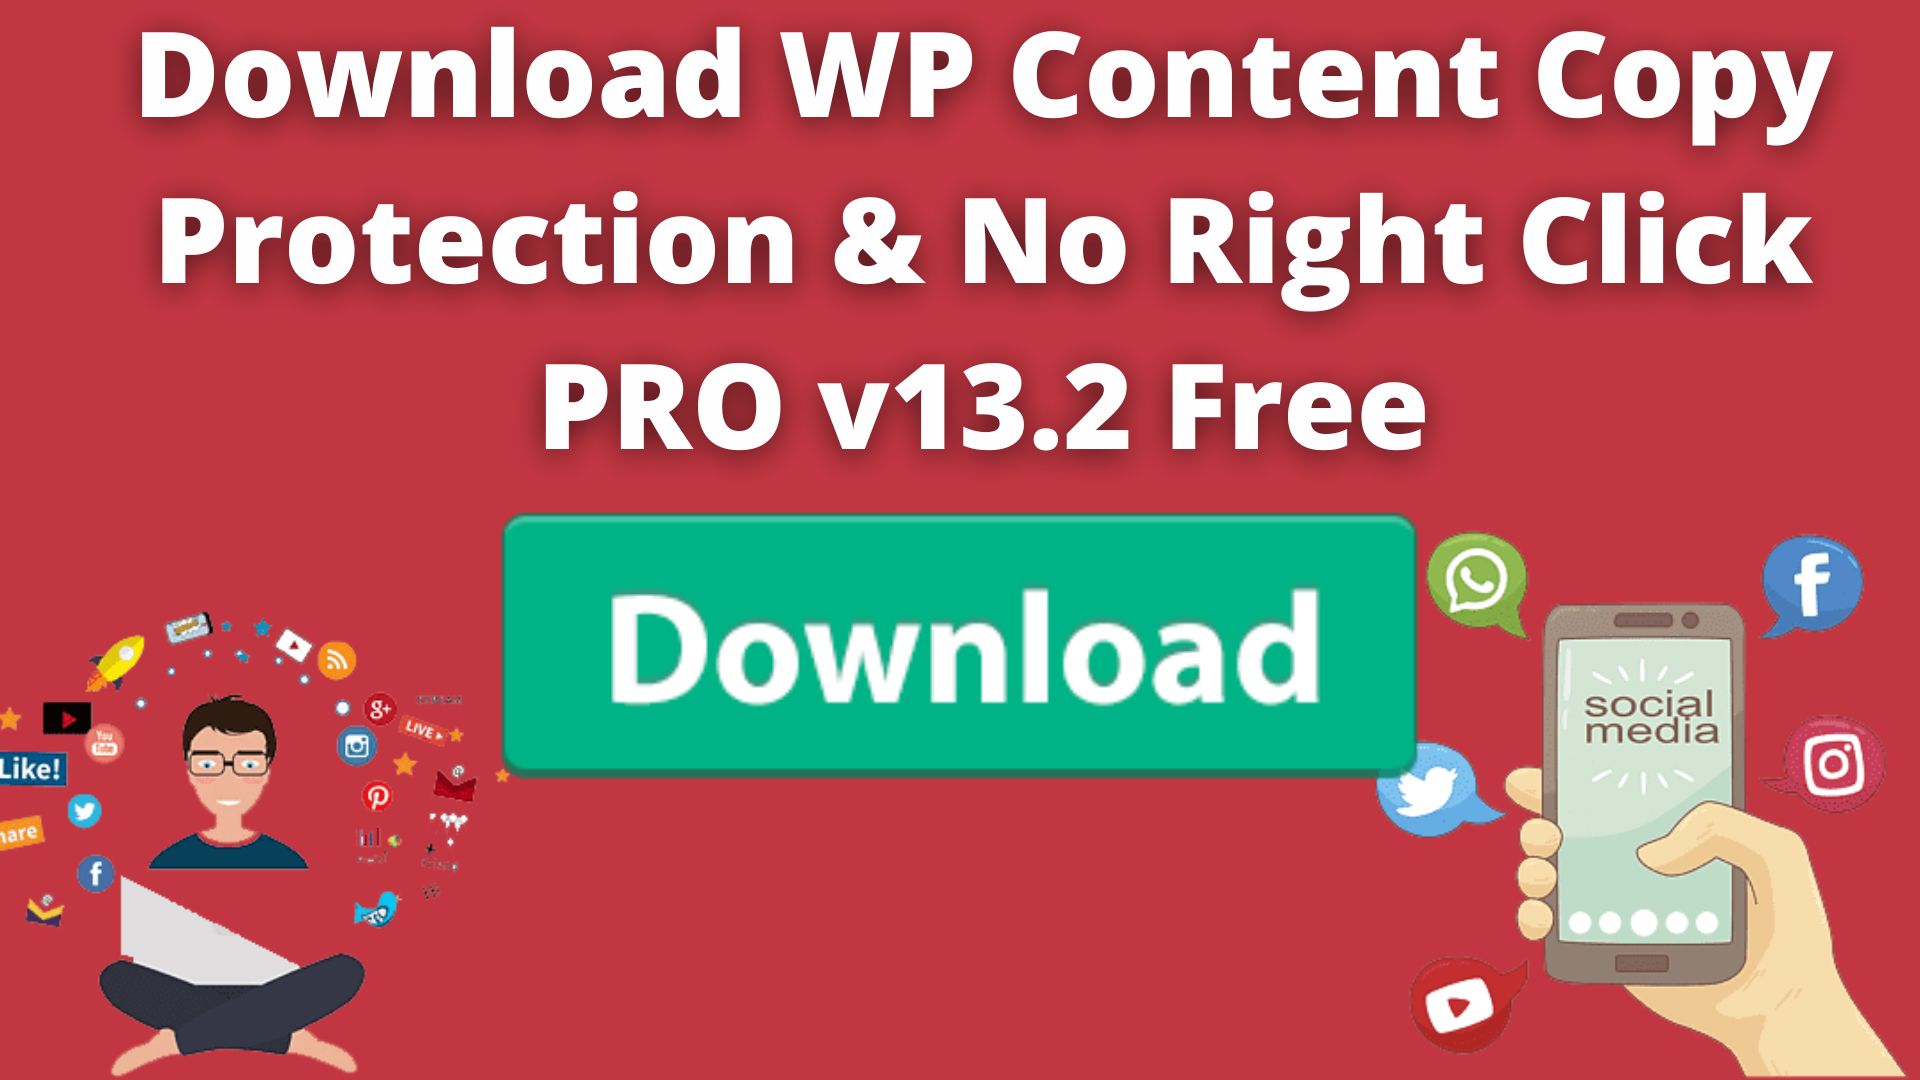 Download wp content copy protection & no right click pro v13. 2 free